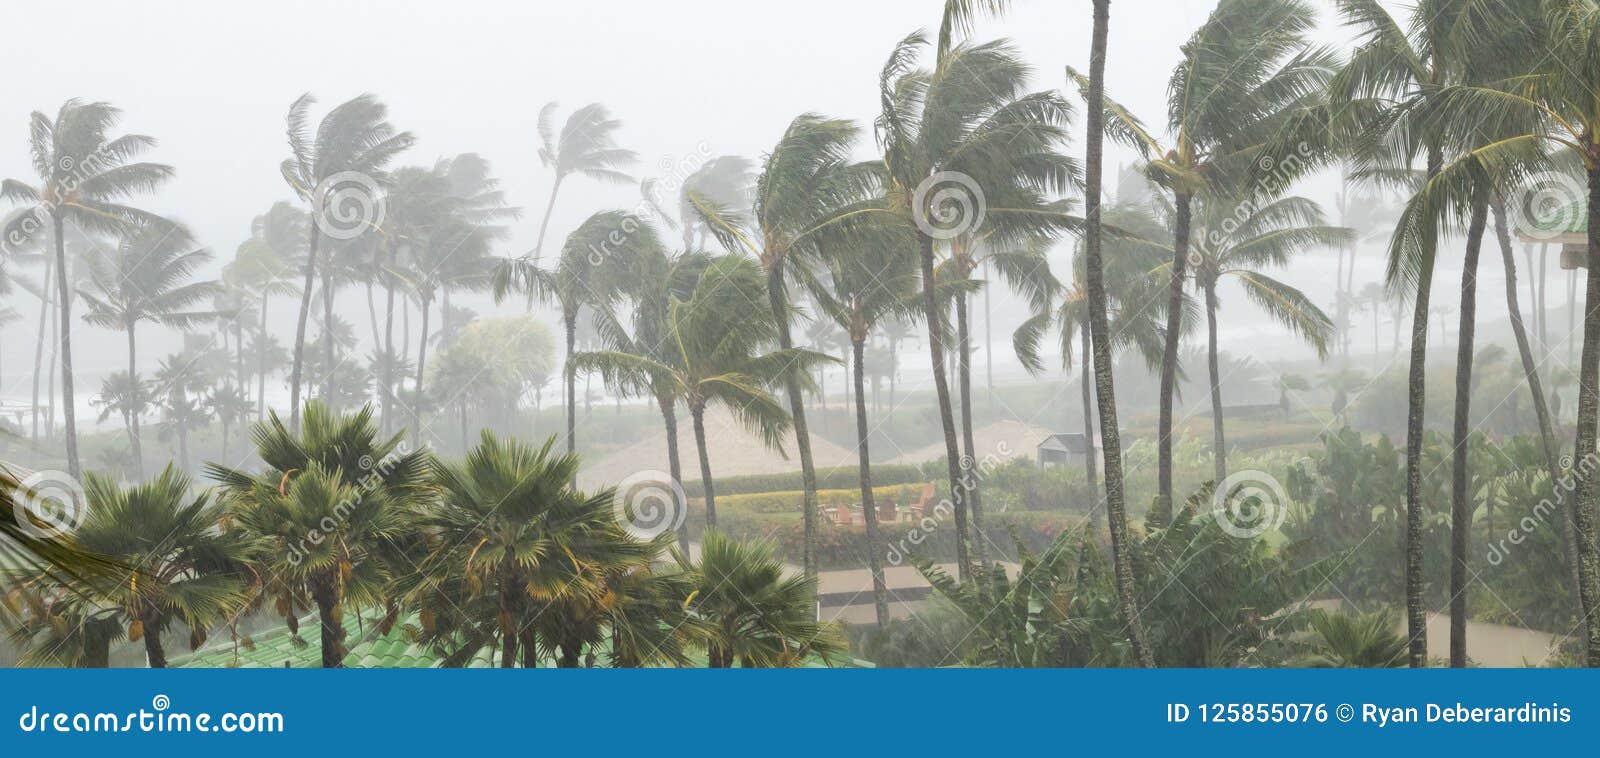 palm trees blowing in the wind and rain as a hurricane nears